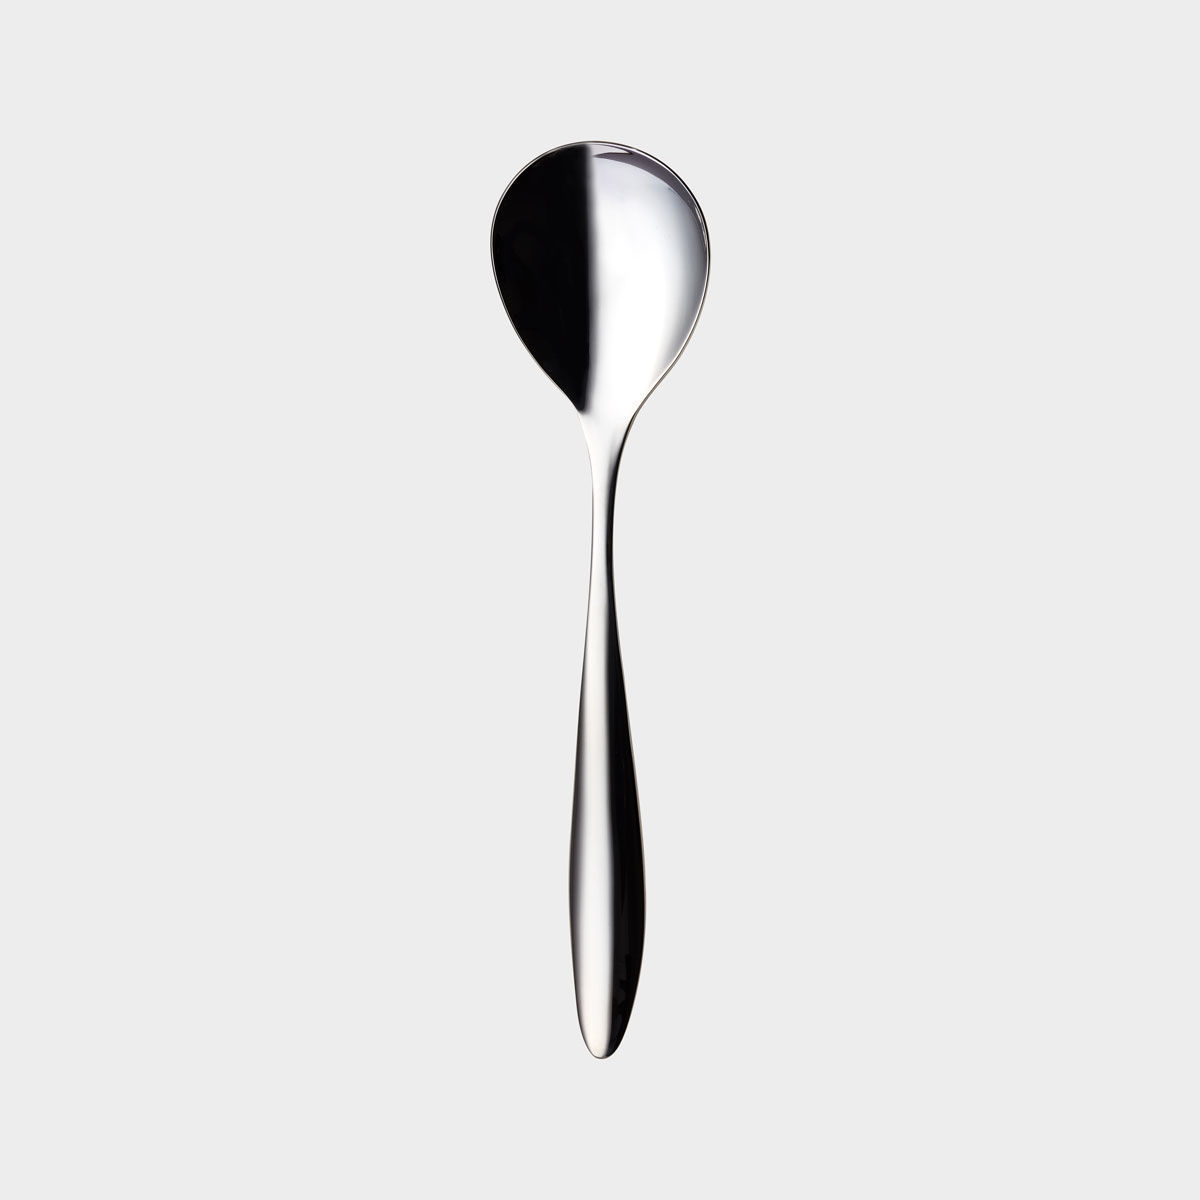 Lykke serving spoon product image